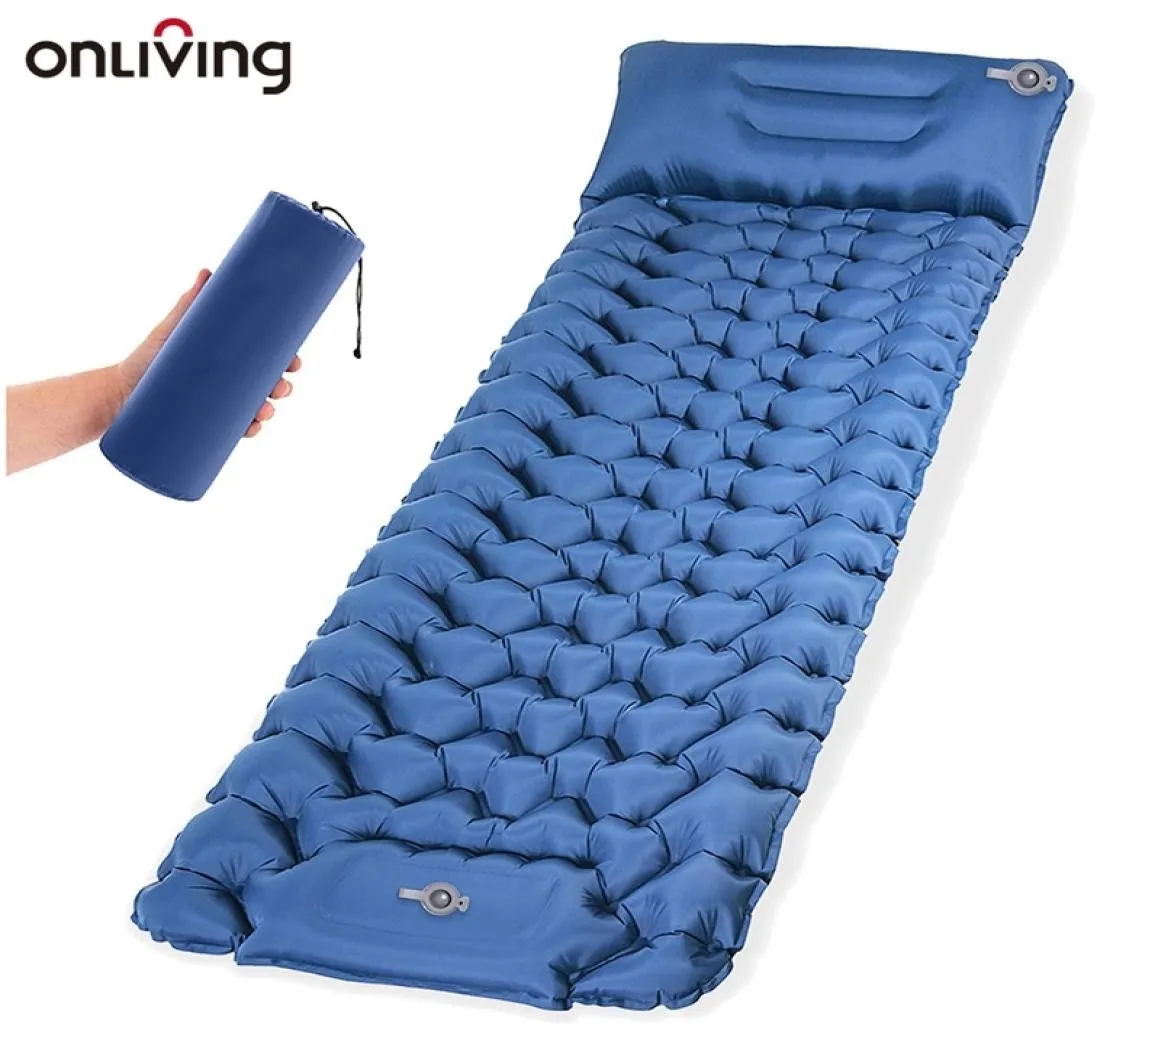 ONLIVING Camping Sleeping Mat Self Inflatable Mattress in Tent Bed Ultralight Air Pad Hiking 2202256256736